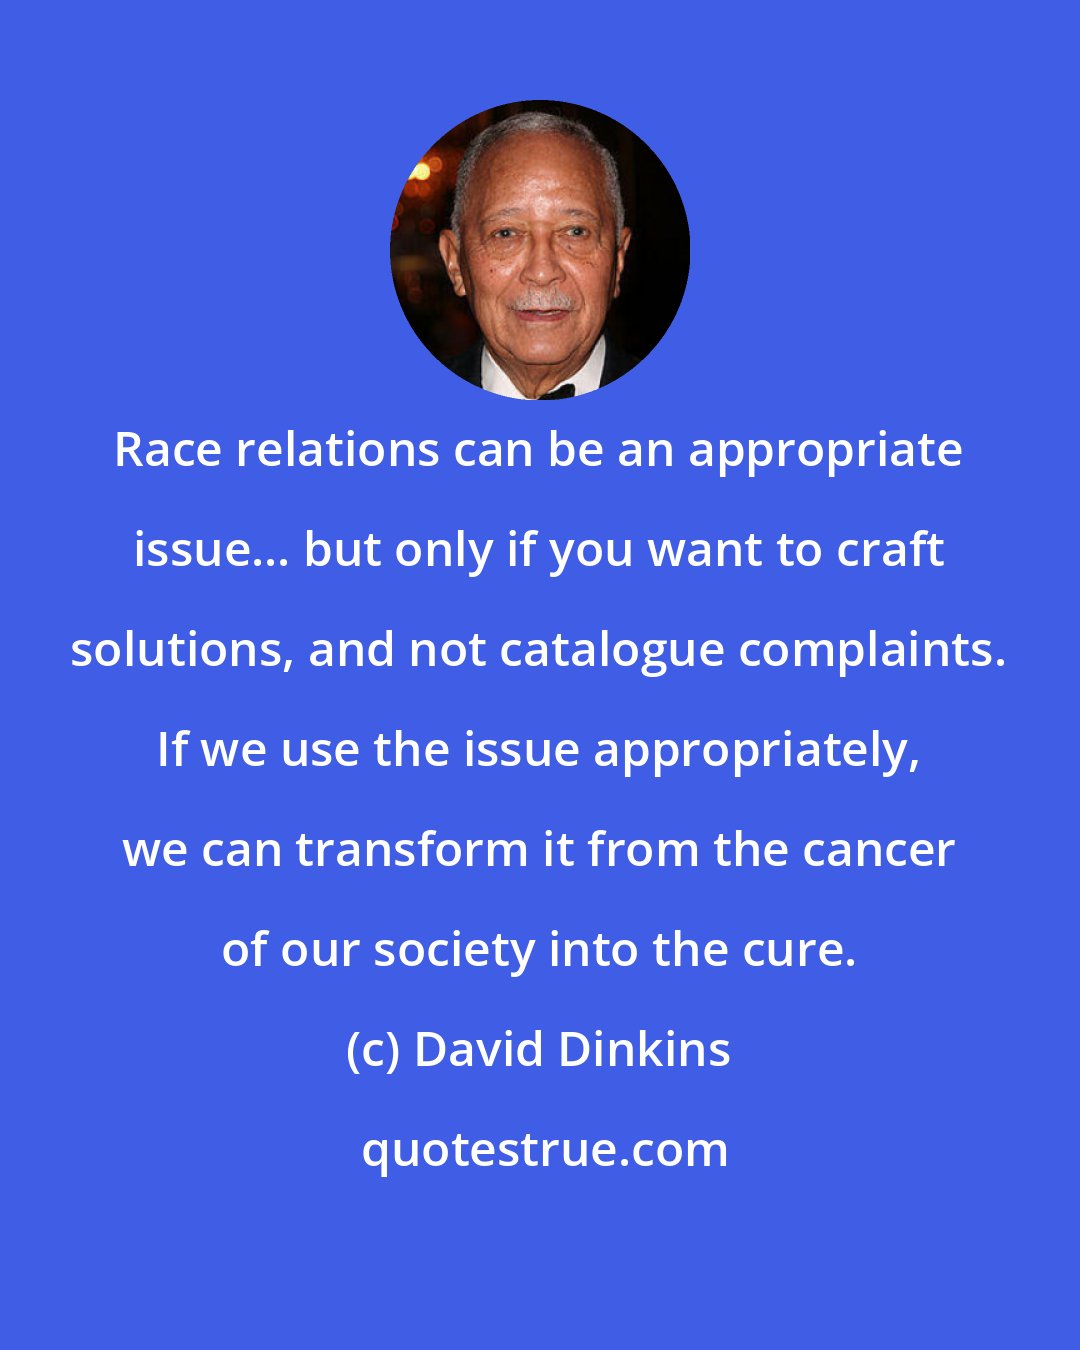 David Dinkins: Race relations can be an appropriate issue... but only if you want to craft solutions, and not catalogue complaints. If we use the issue appropriately, we can transform it from the cancer of our society into the cure.